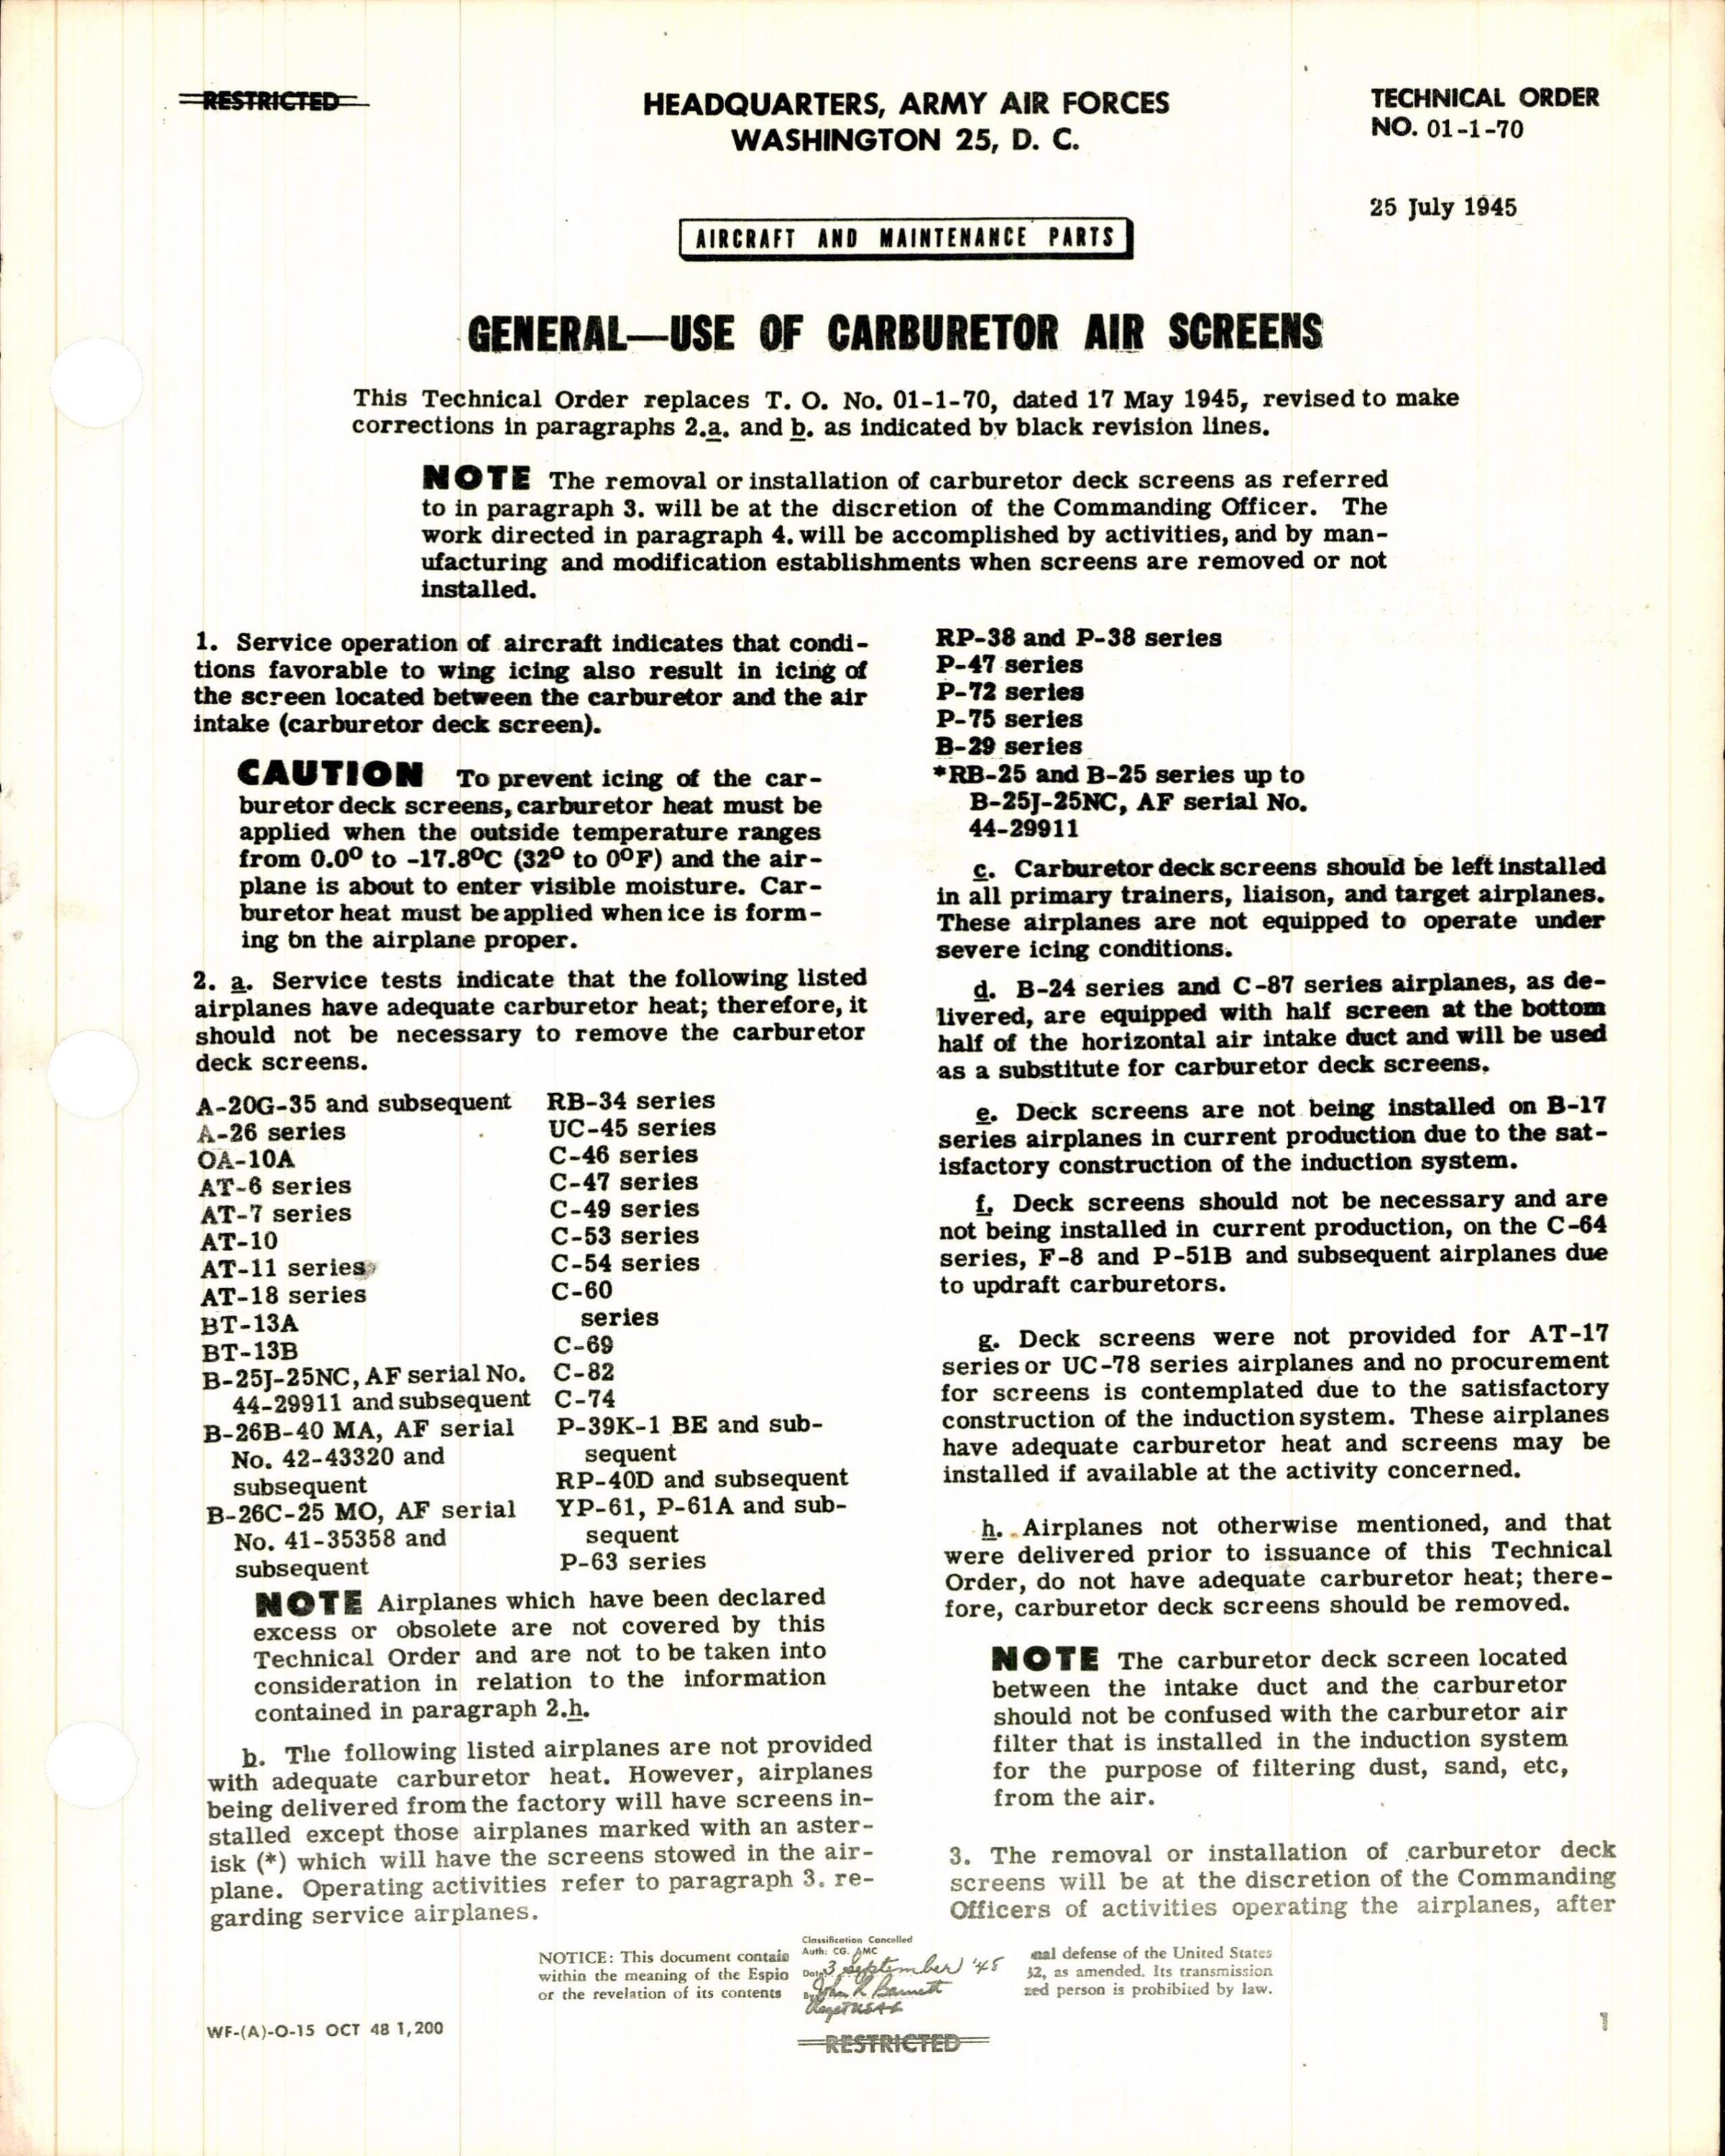 Sample page 1 from AirCorps Library document: Use of Carburetor Air Screens